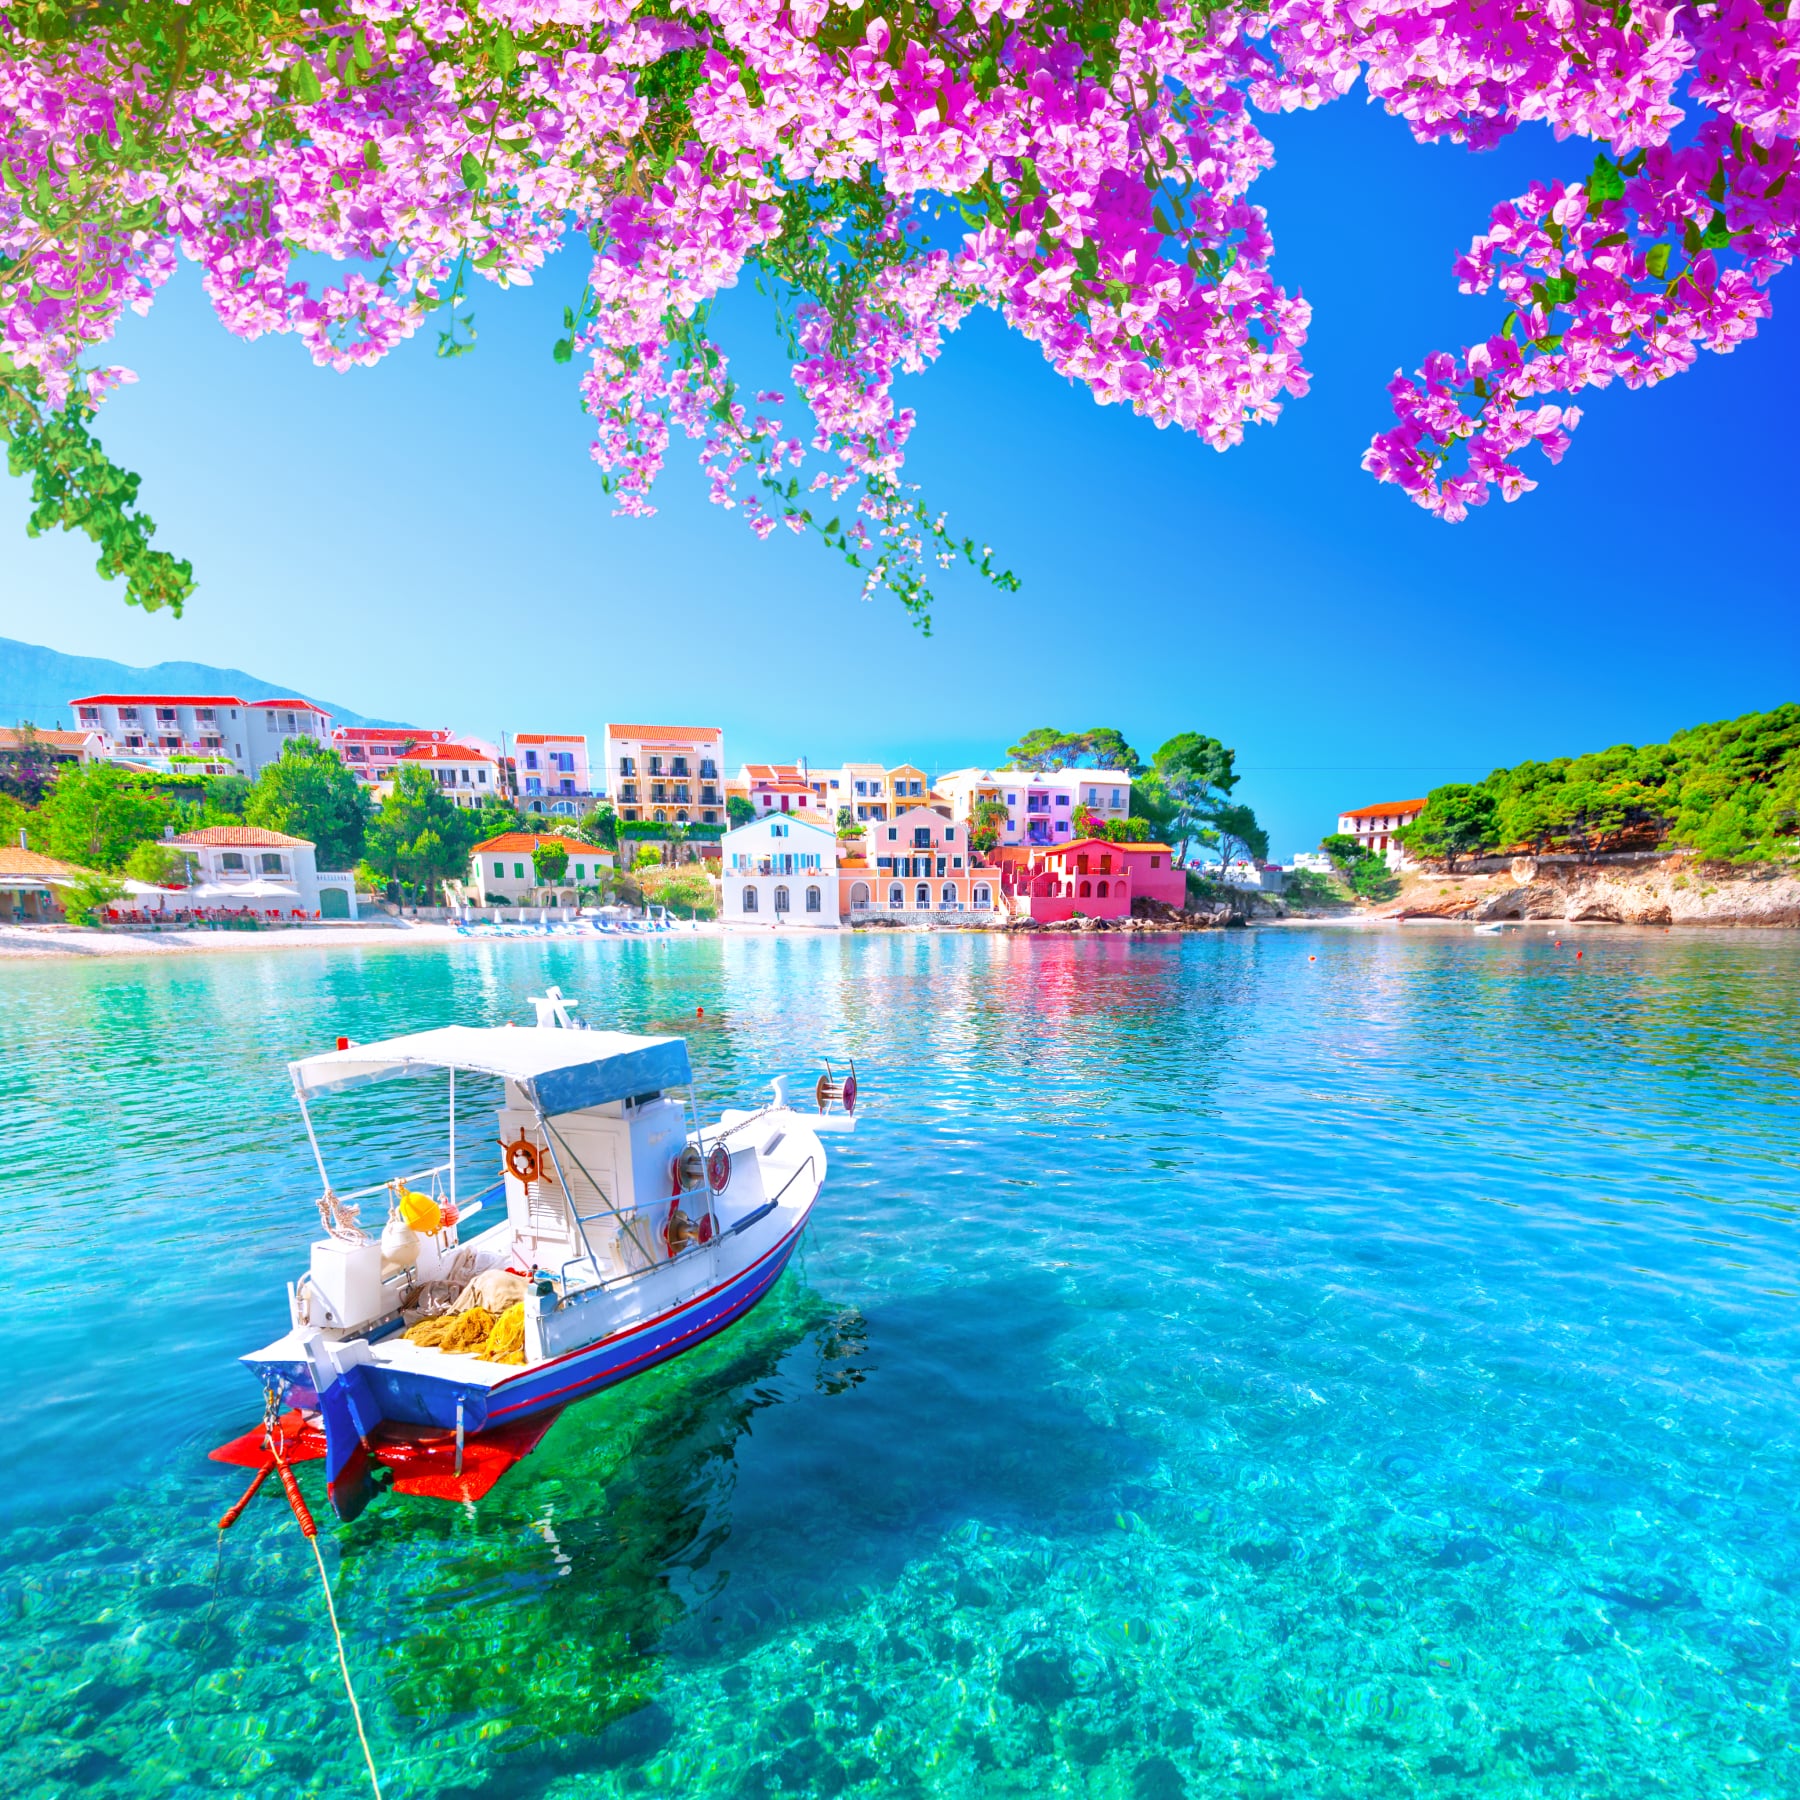 Kefalonia is one of the best travel destinations in literature